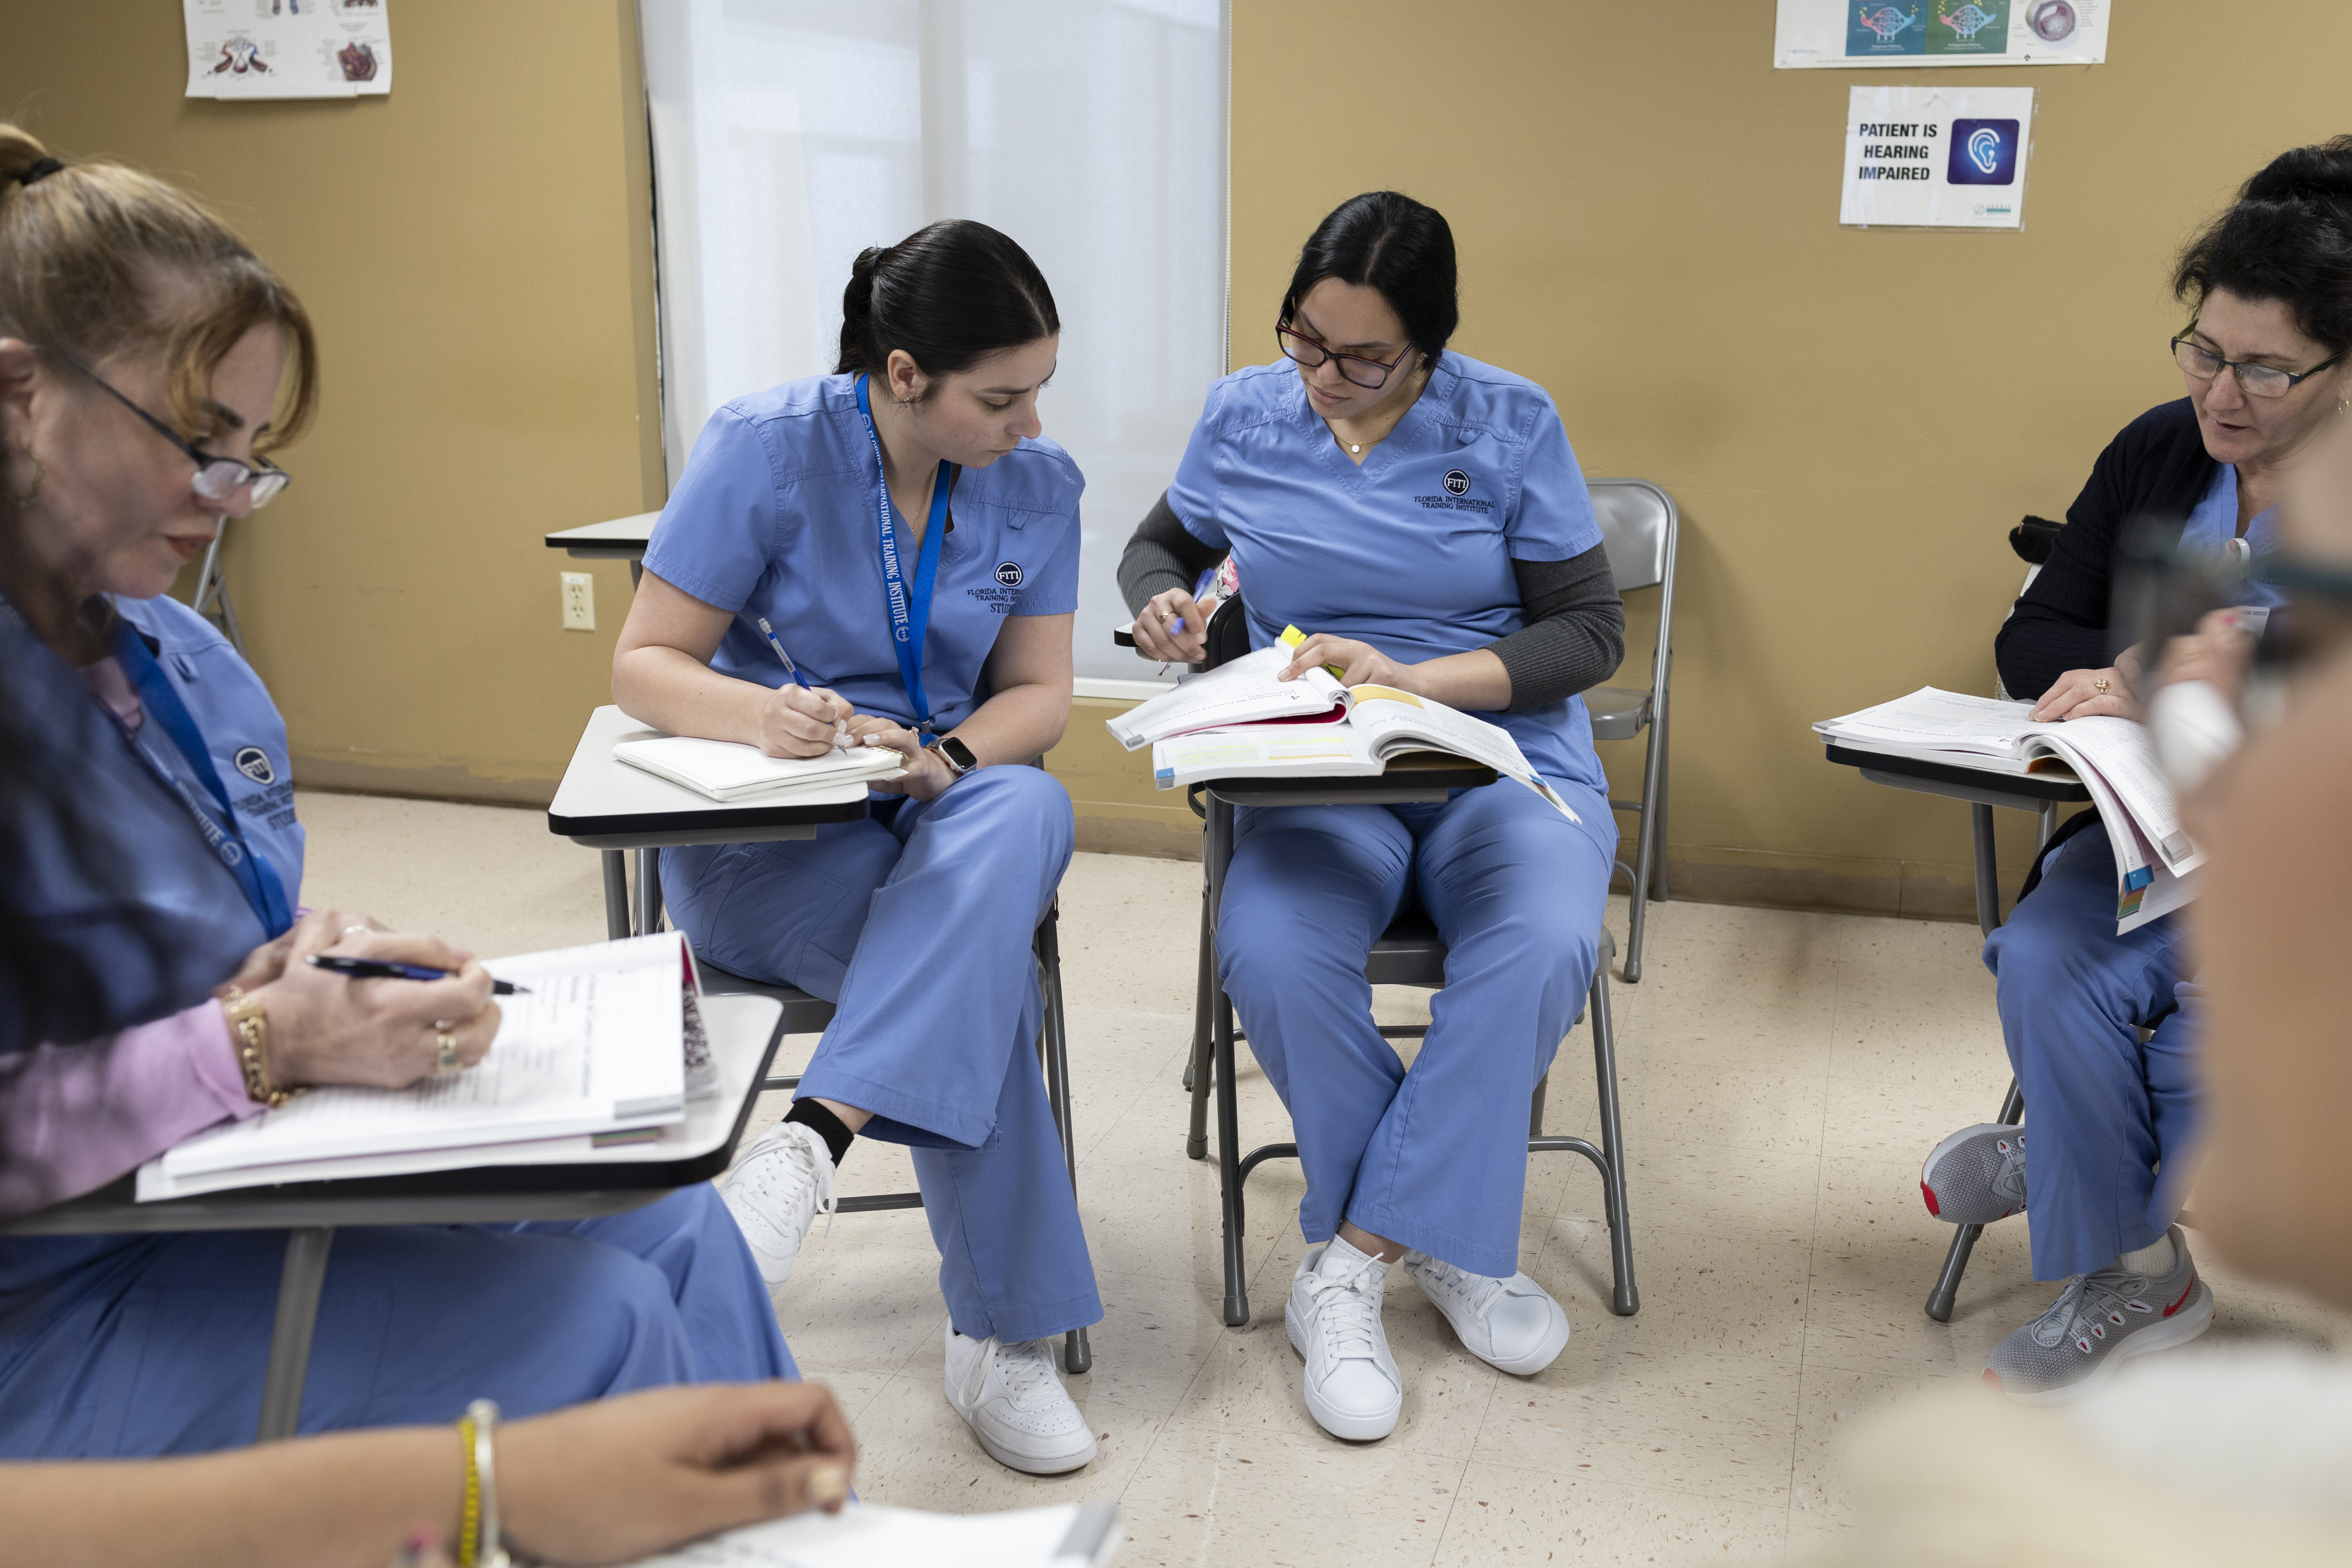 Company Highlights Top 10 Reasons to Pursue a Career as a Medical Assistant